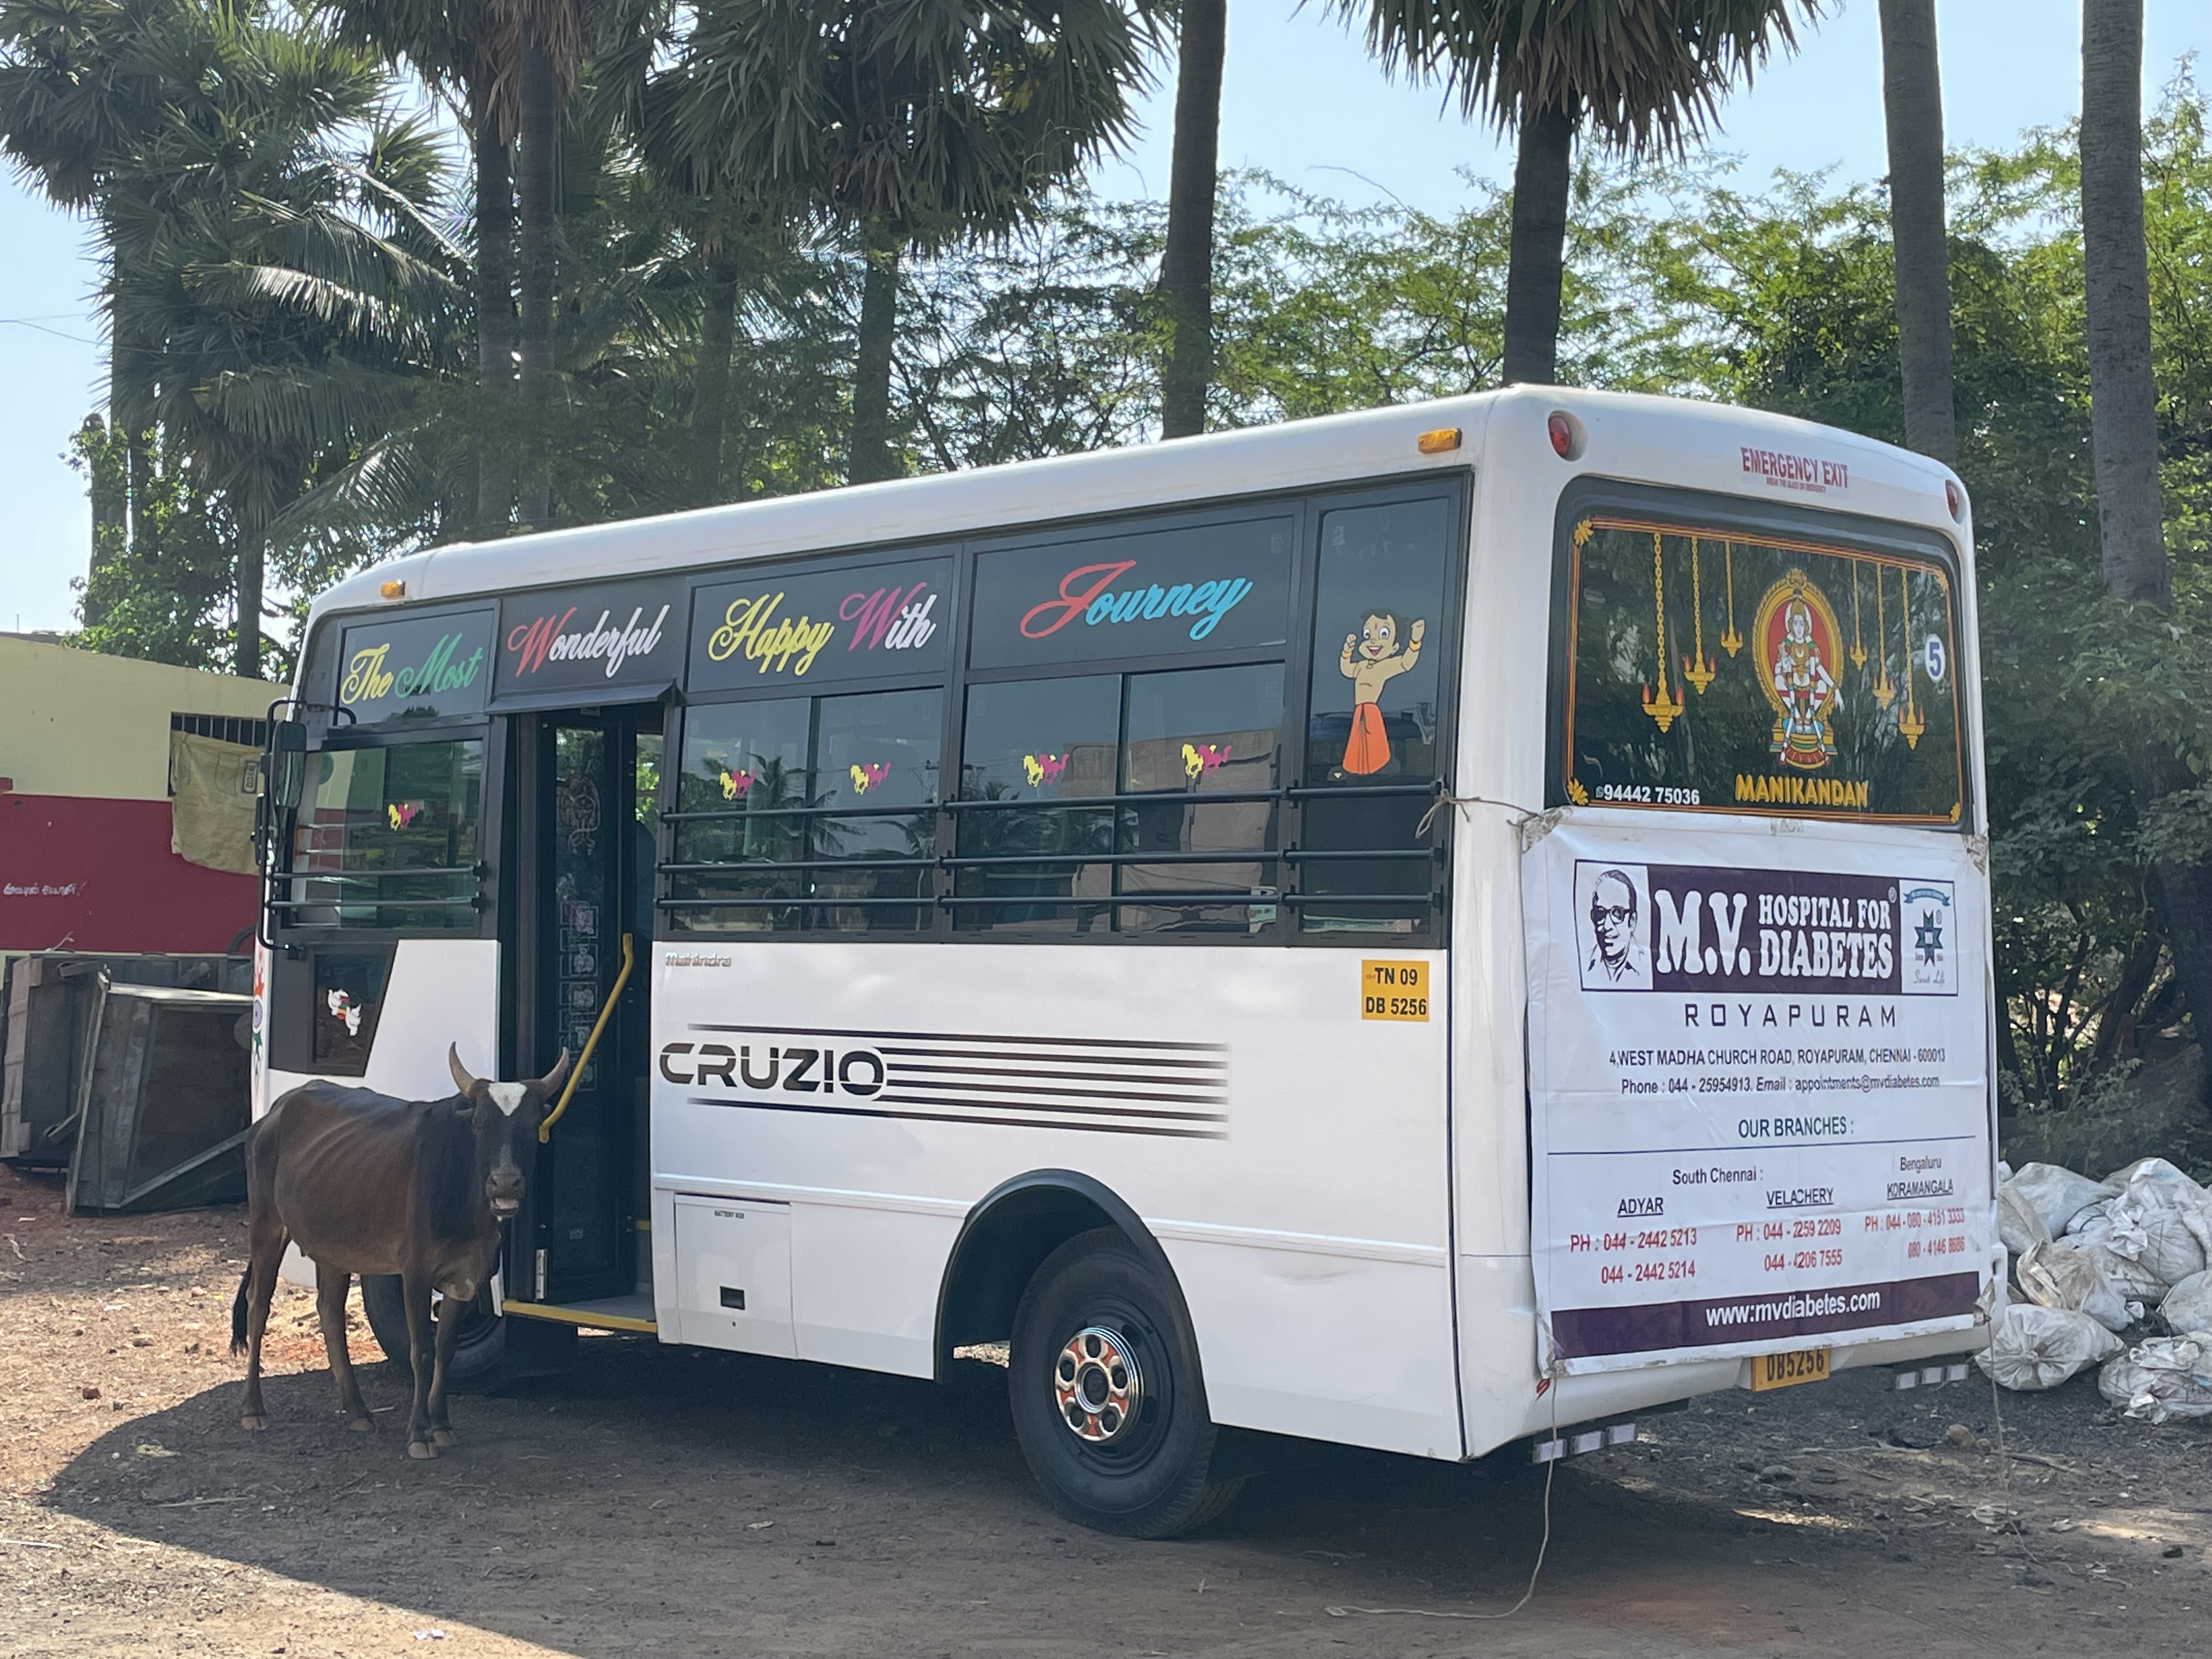 a cow standing in from of the M.V. Hospital for Diabetes bus